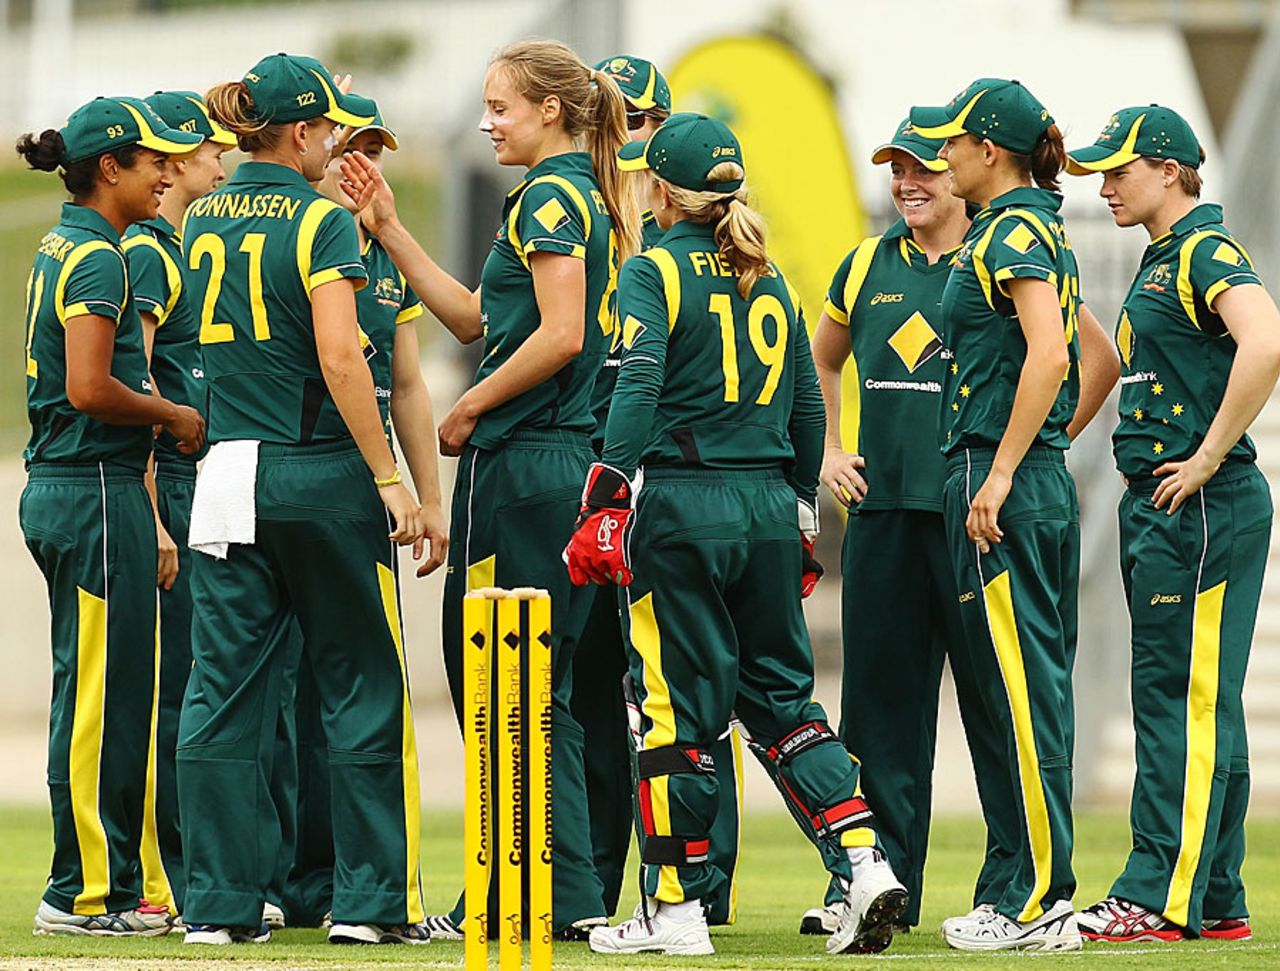 Ellyse Perry and her team-mates celebrate a wicket, Australia v New Zealand, 3rd Women's ODI, Rose Bowl, Sydney, January 29, 2012